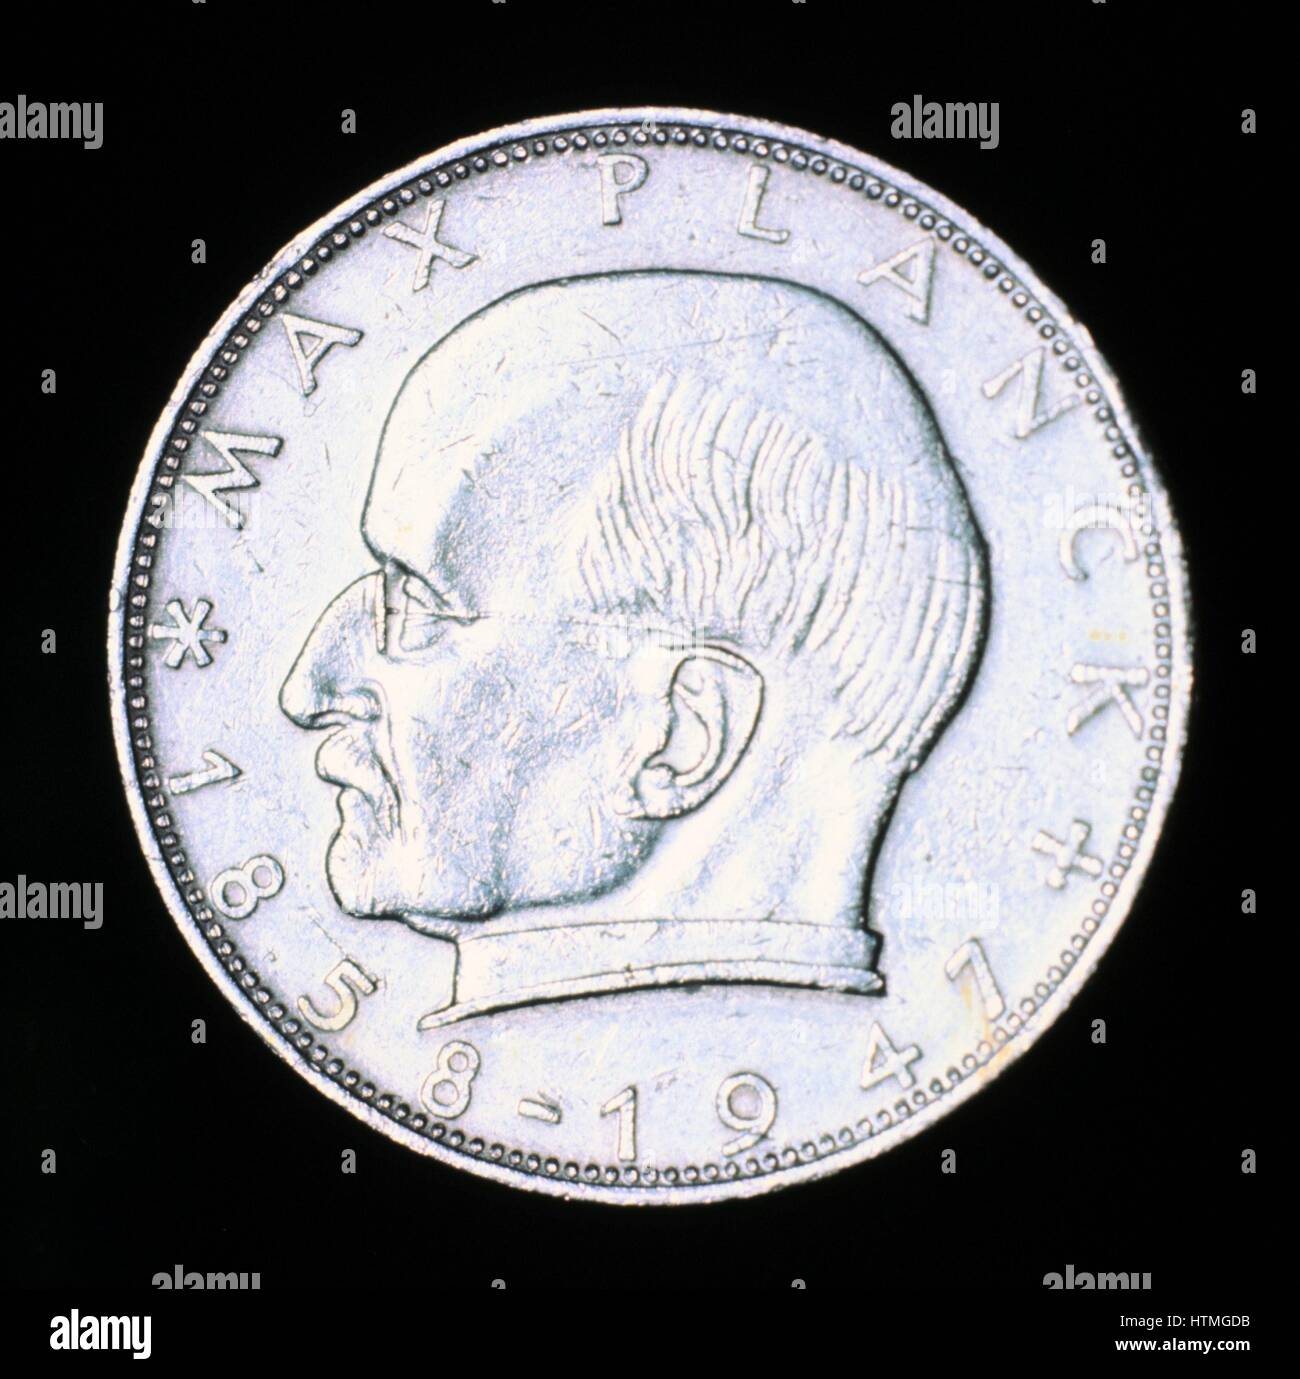 Max Planck (1858-1947) German theoretical physicist. Quantum Theory. Nobel prize for physics, 1918. From the obverse of a German 2 DM piece Stock Photo